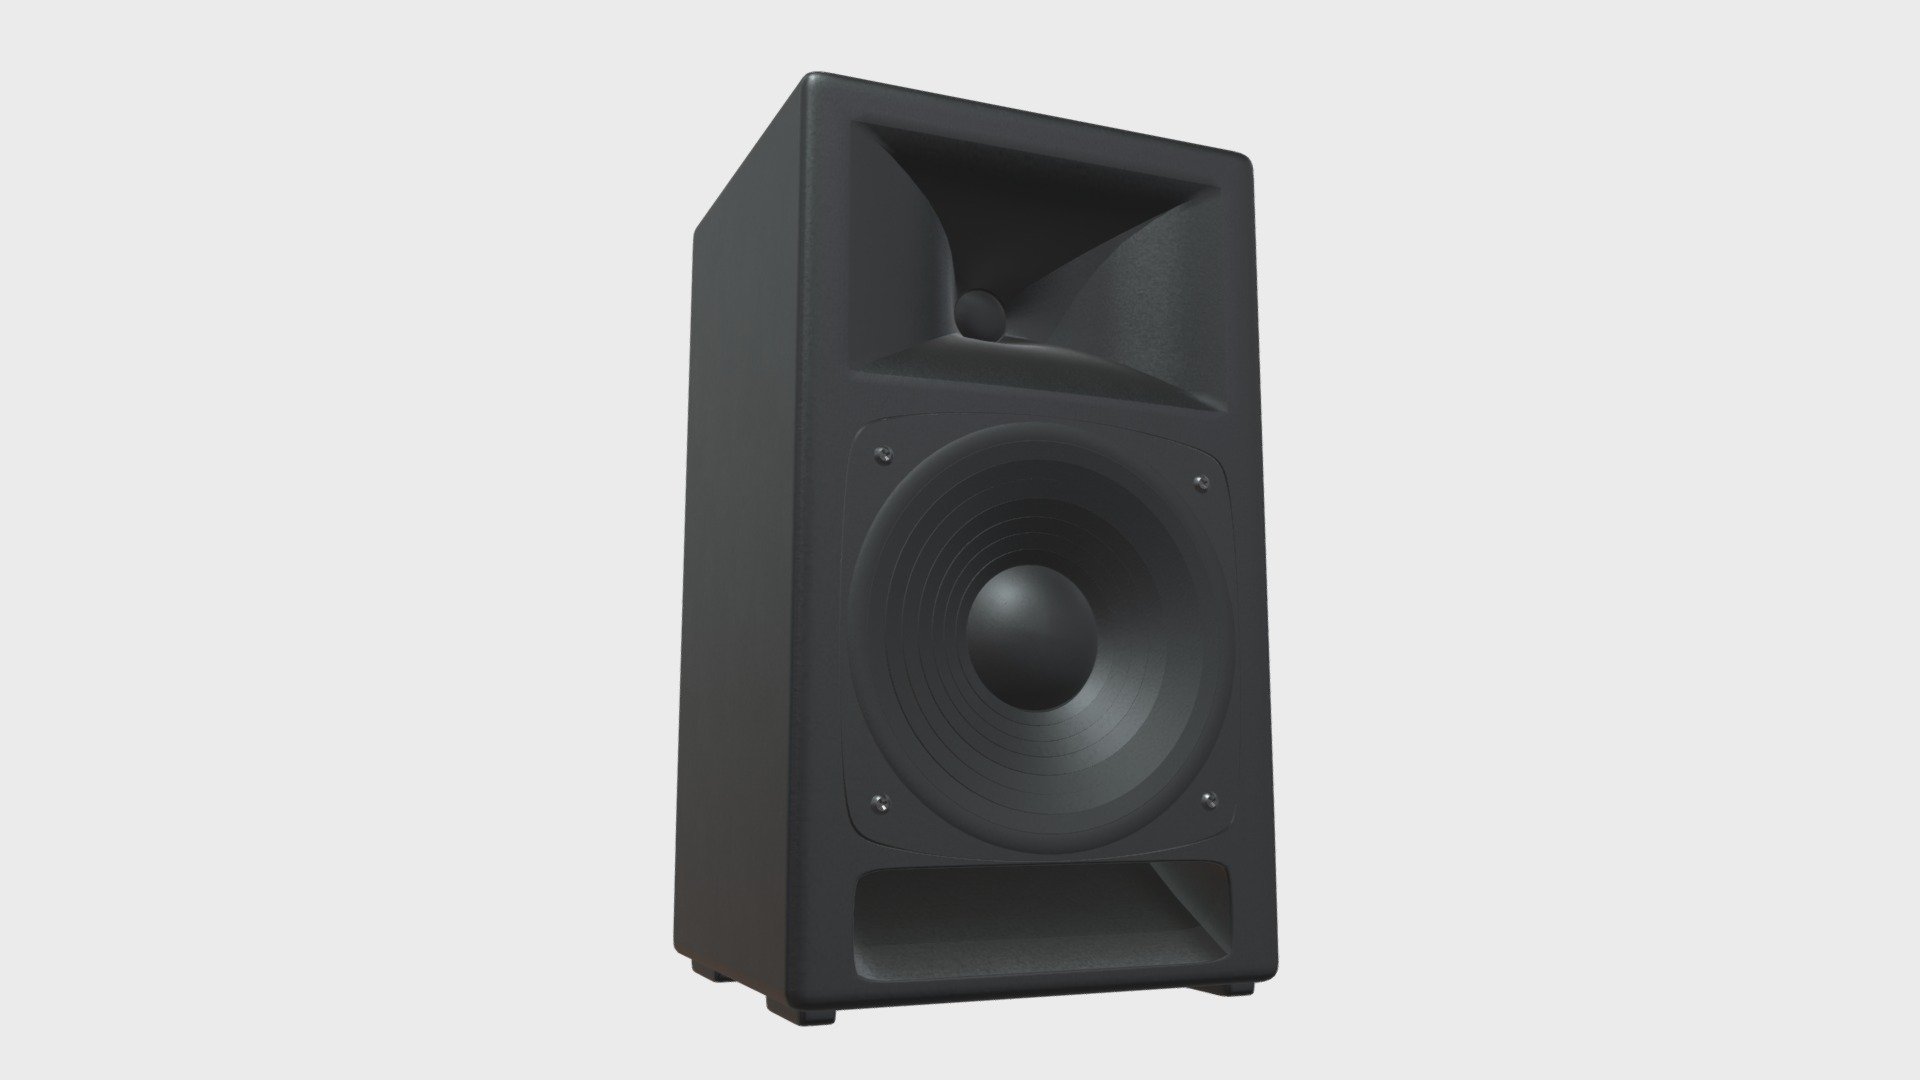 === The following description refers to the additional ZIP package provided with this model ===

2-way bass reflex loudspeaker 3D Model. Production-ready 3D Model, with PBR materials, textures, non overlapping UV Layout map provided in the package.

Quads only geometries (no tris/ngons).

Formats included: FBX, OBJ; scenes: BLEND (with Cycles / Eevee PBR Materials and Textures); other: png with Alpha.

1 Object (mesh), 1 PBR Material, UV unwrapped (non overlapping UV Layout map provided in the package); UV-mapped Textures.

UV Layout maps and Image Textures resolutions: 2048x2048; PBR Textures made with Substance Painter.

Polygonal, QUADS ONLY (no tris/ngons); 33137 vertices, 32528 quad faces (65056 tris).

Real world dimensions; scene scale units: cm in Blender 3.1 (that is: Metric with 0.01 scale).

Uniform scale object (scale applied in Blender 3.1) 3d model